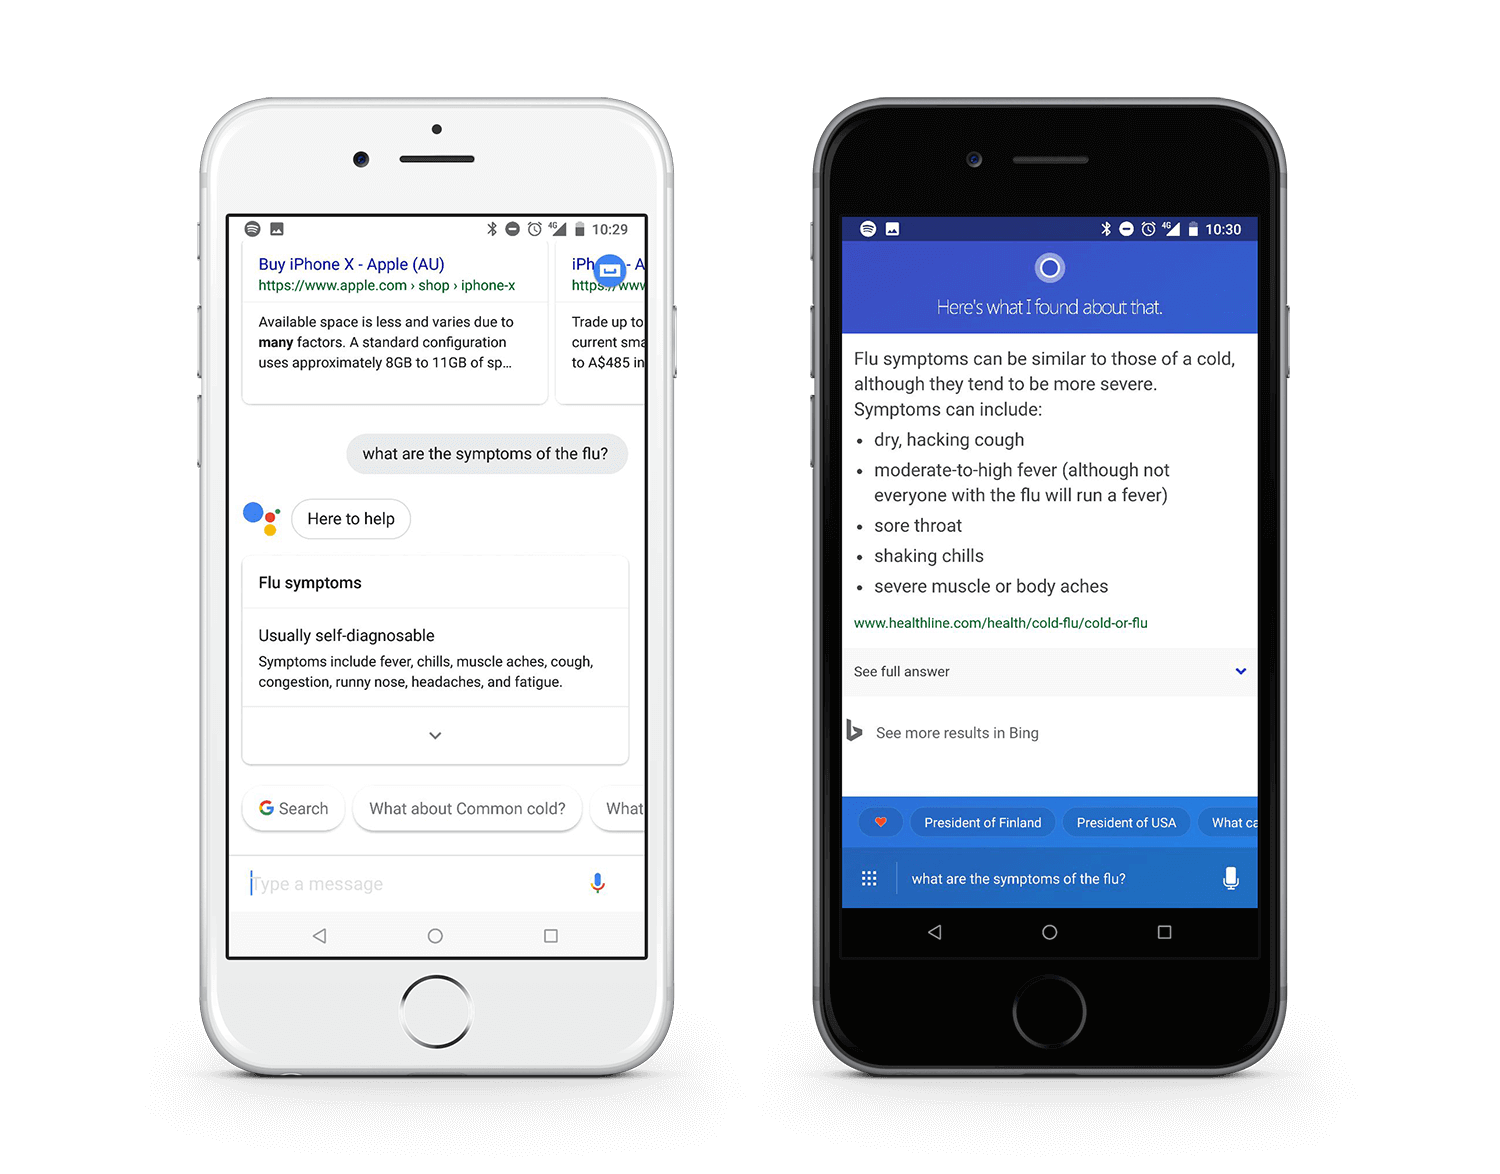 Google Assistant vs Cortana : Search results from question "what are flu symtpoms?"